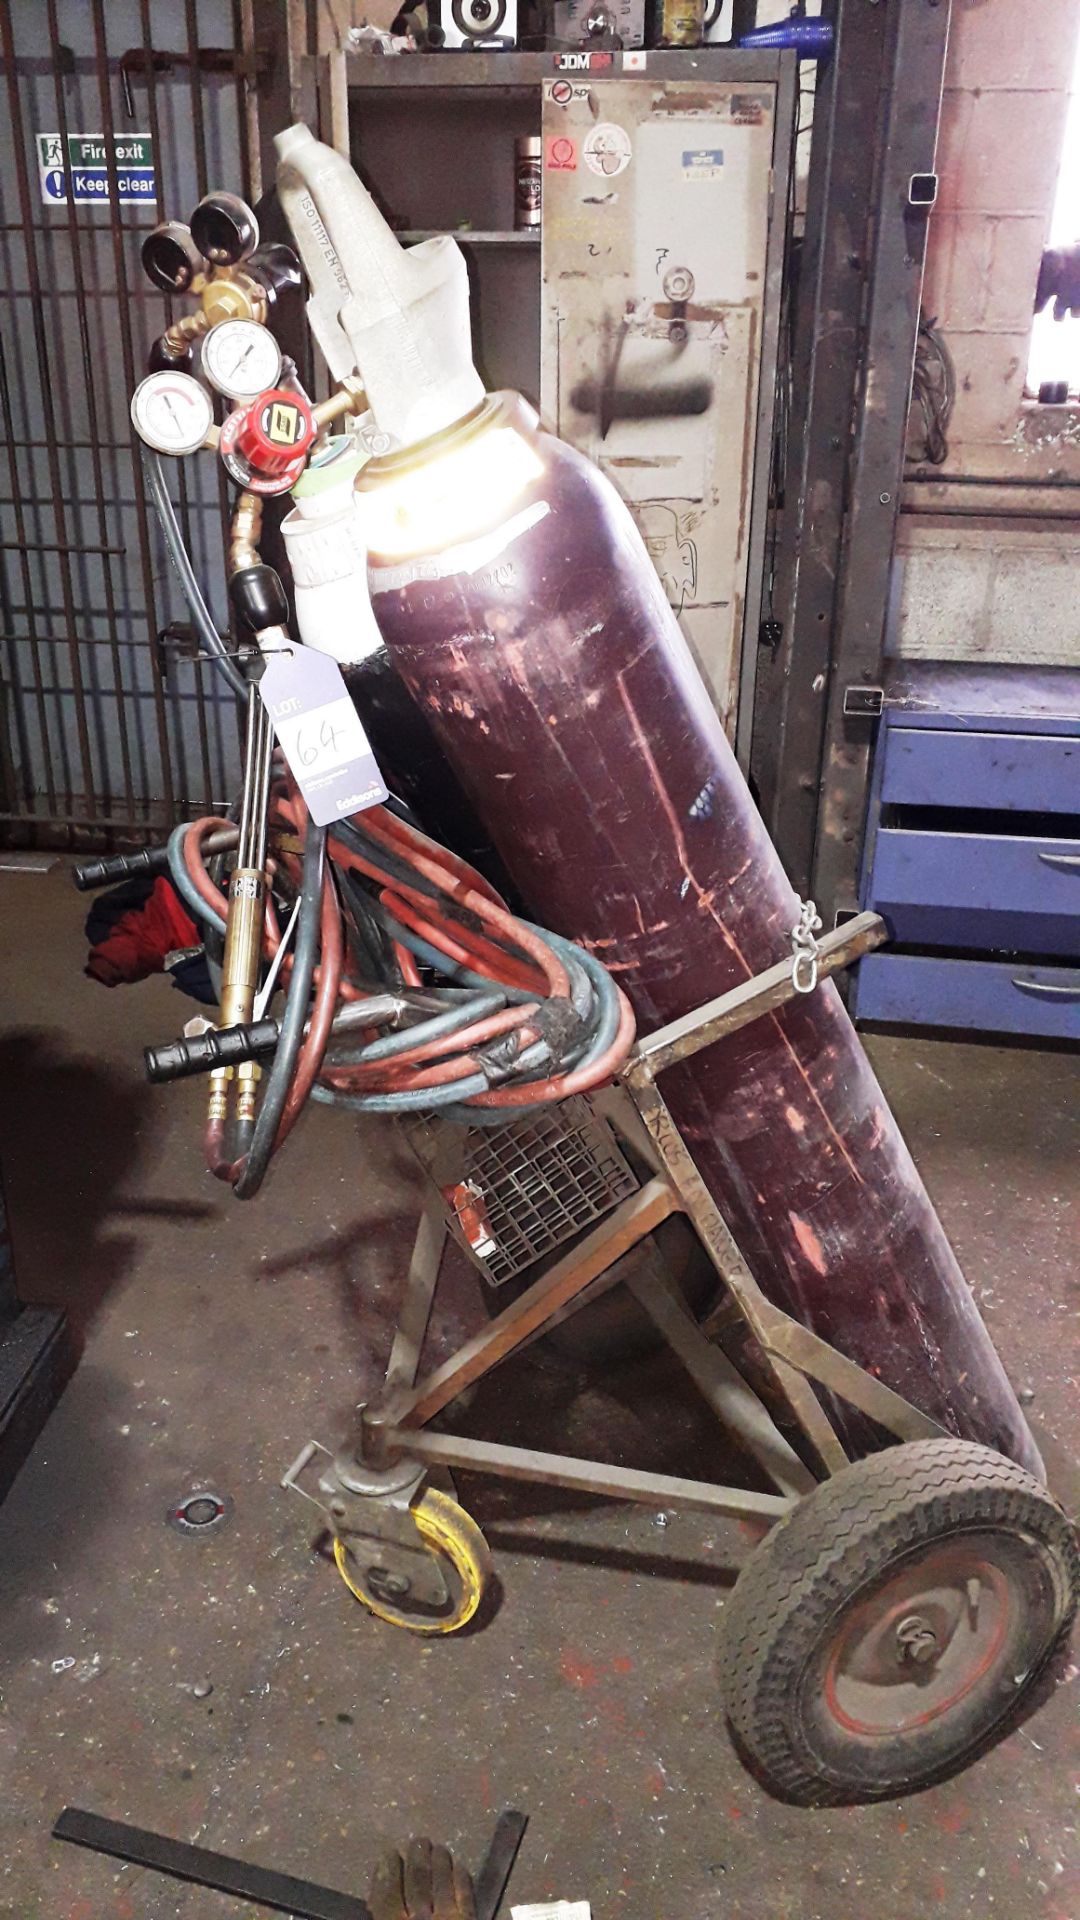 Set of Acetylene Hoses & Gauges, Flame Cutting Torch, Twin Bottle Trolley (Bottles Not Included)